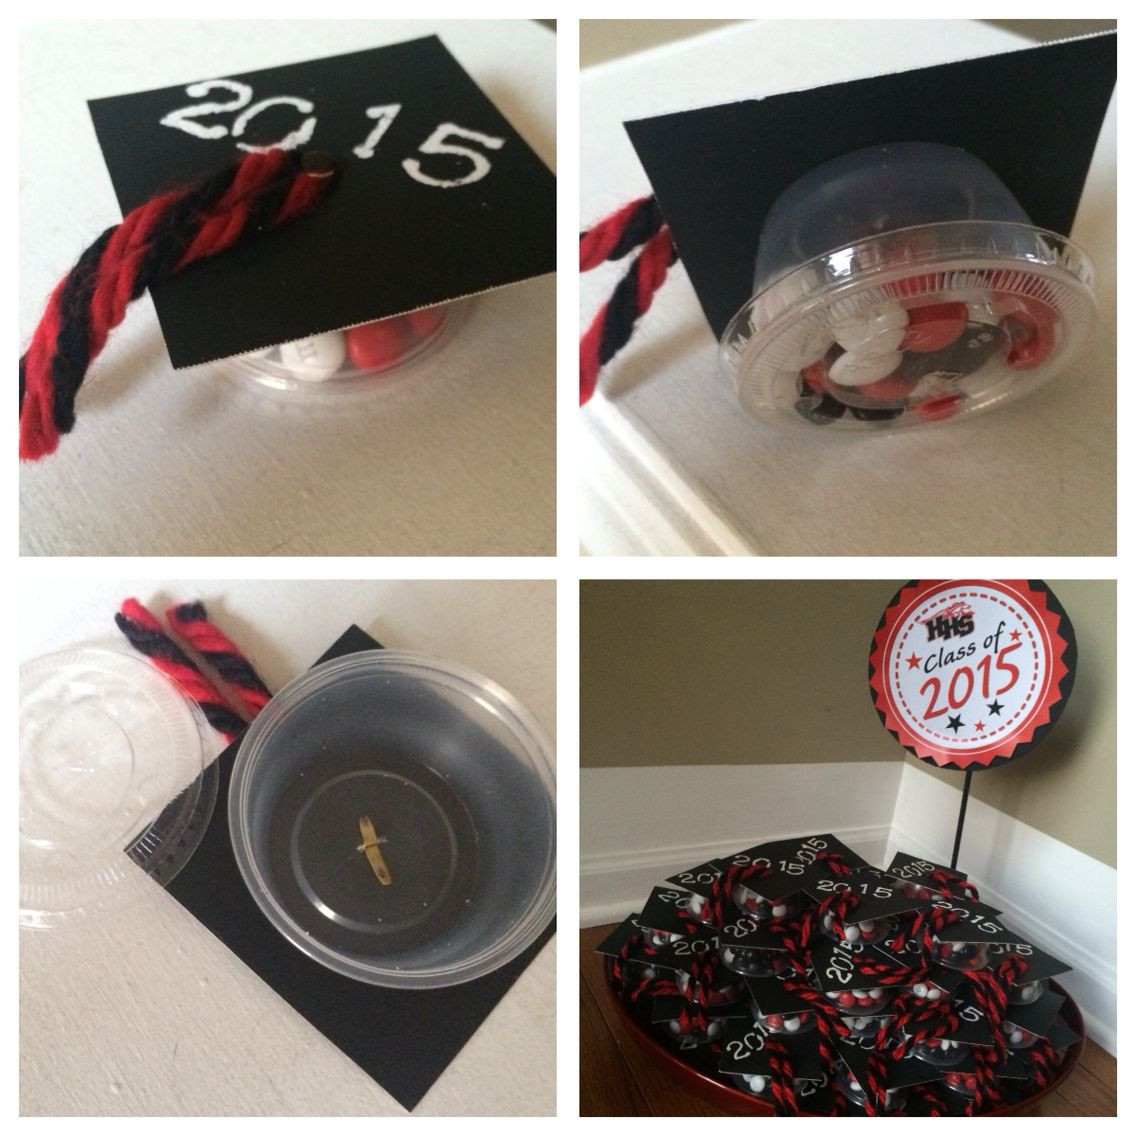 High School Graduation Party Favor Ideas
 Graduation Party Favors I made these using 3"x3" black